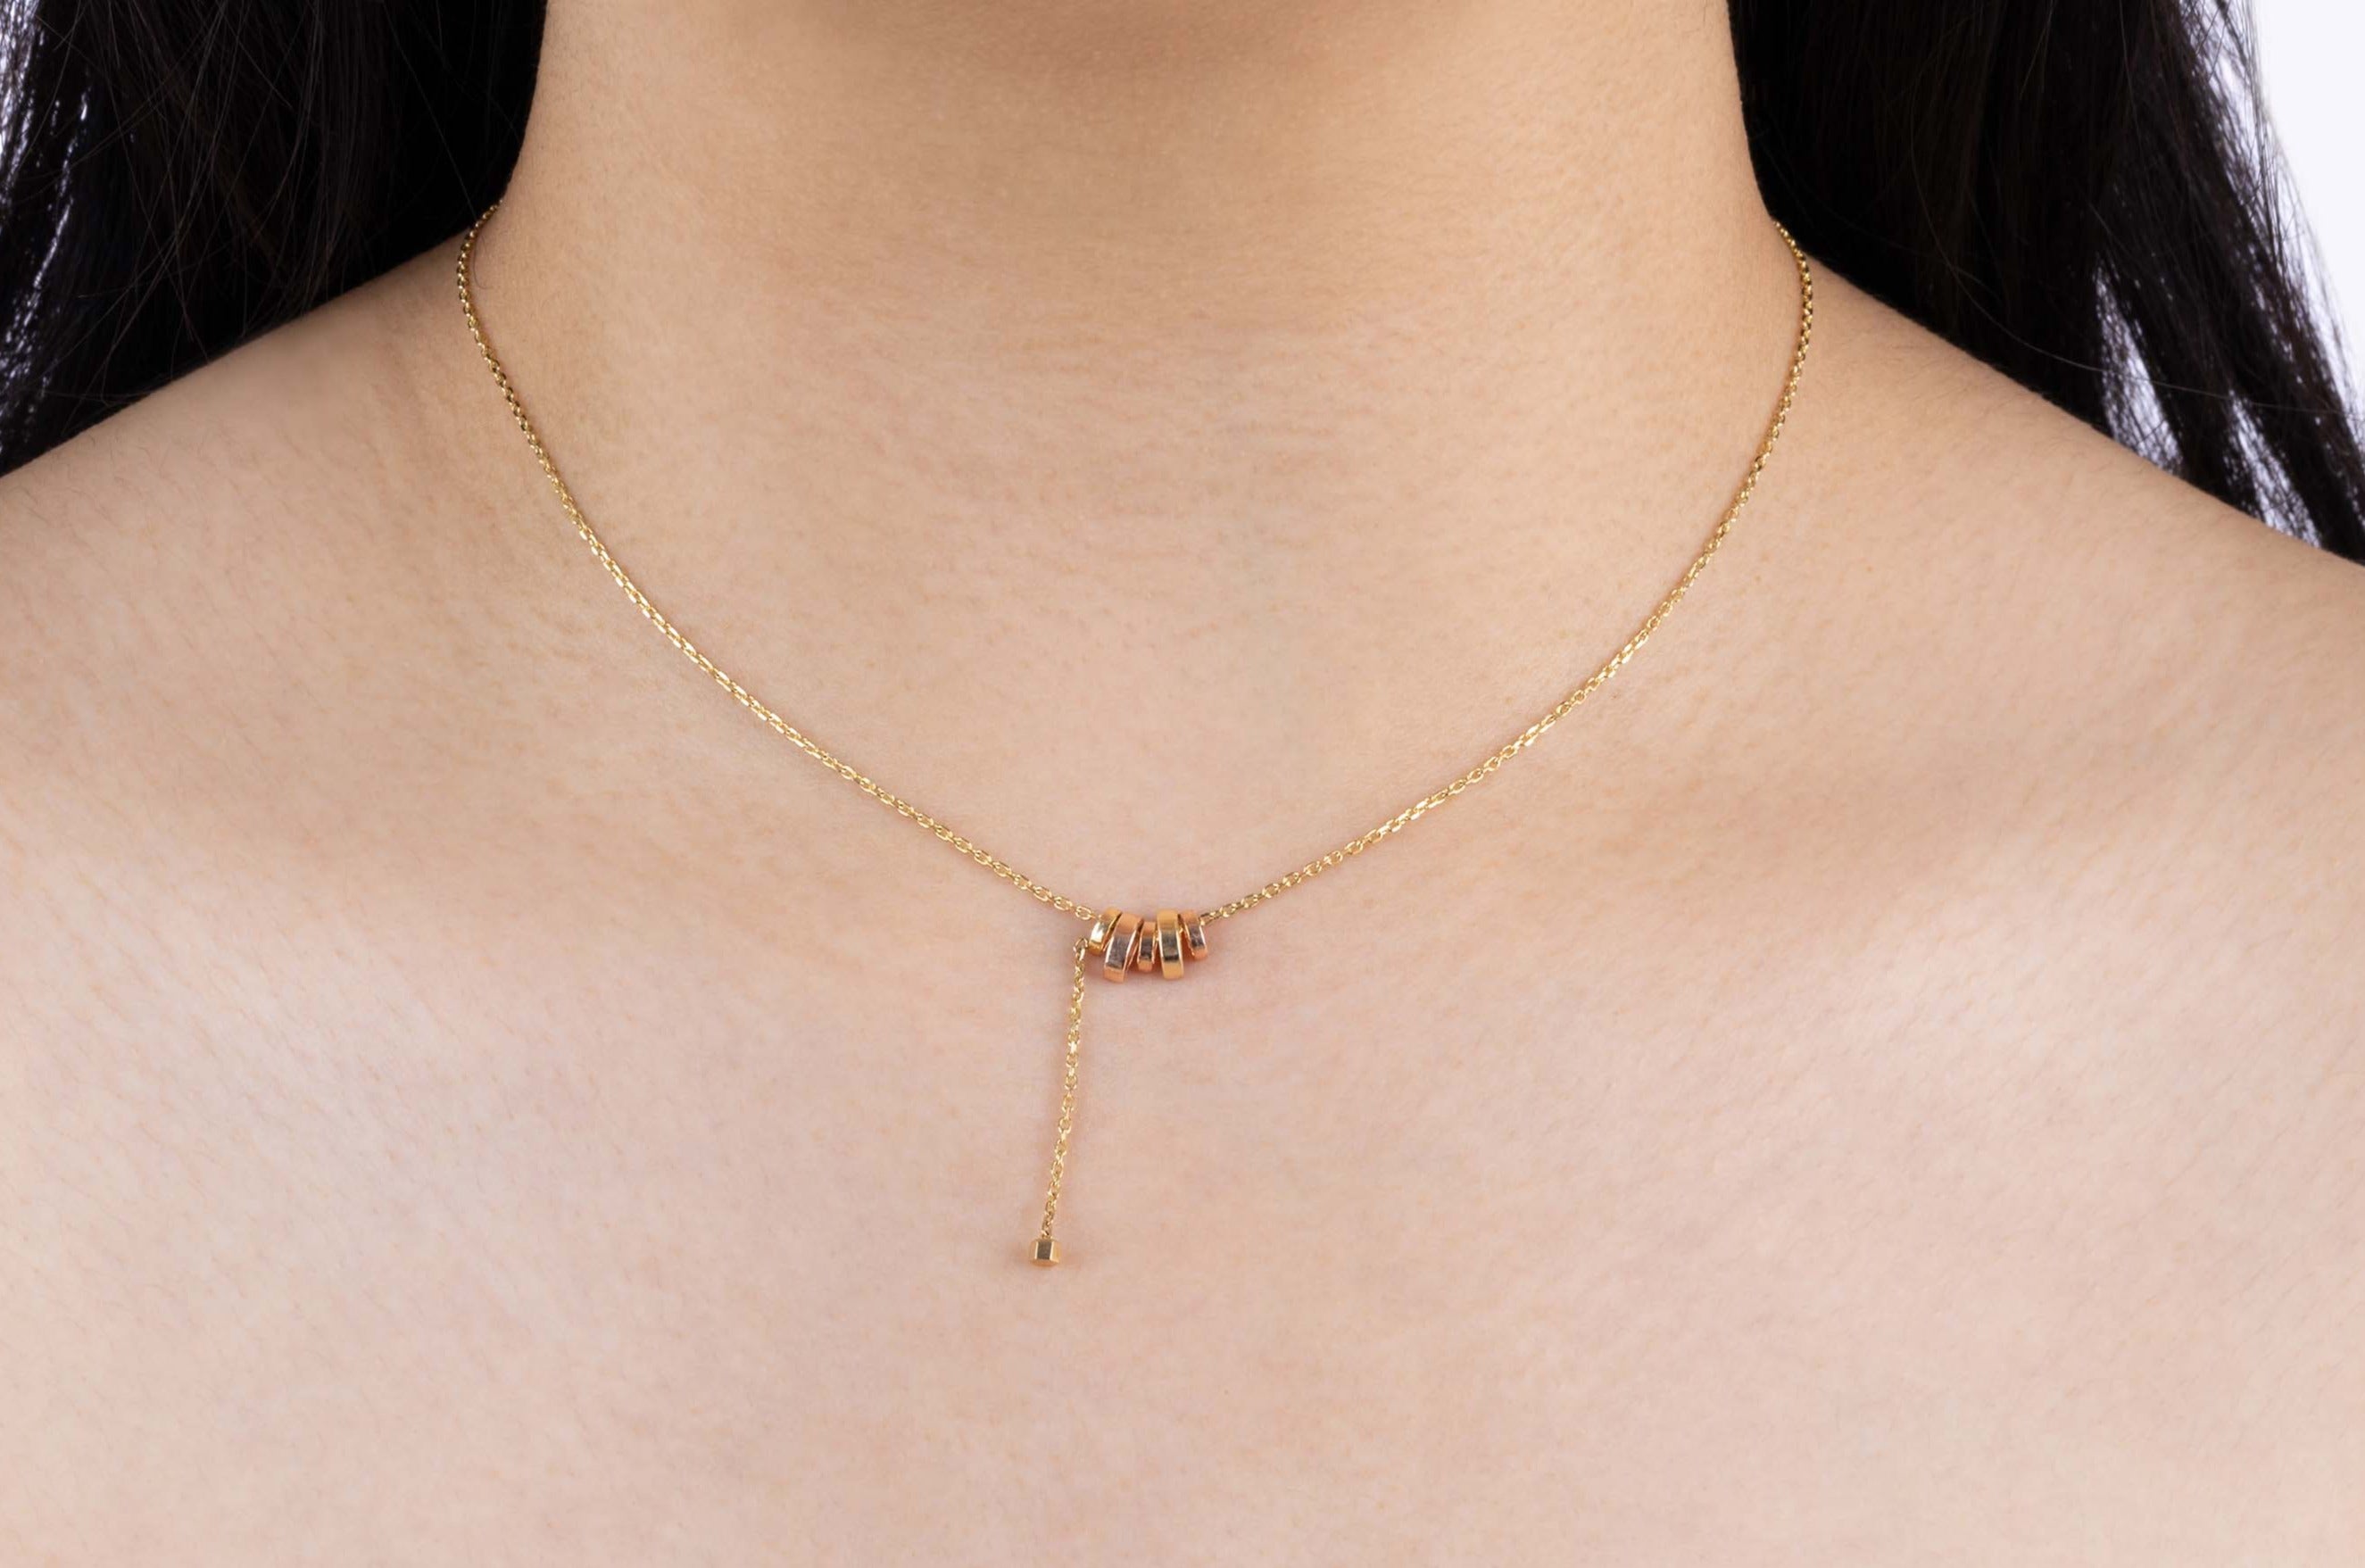 Yellow Gold Necklace with alternating Yellow and Rose Gold discs, hanging chain, Small - Model shot